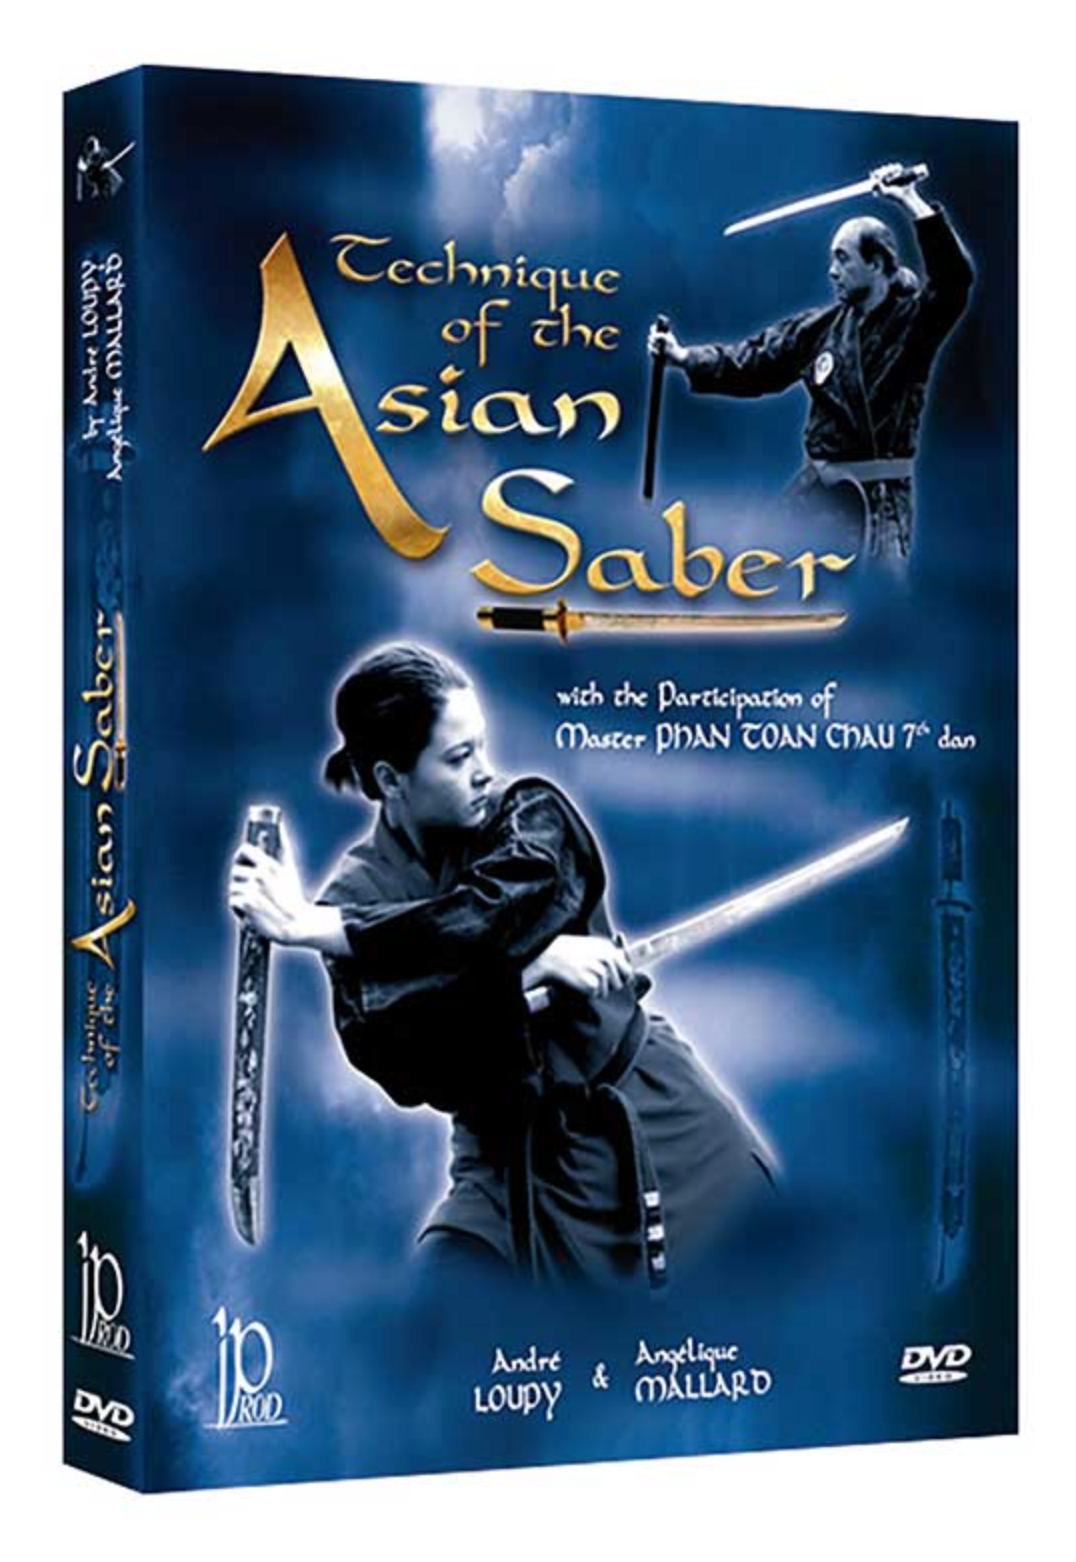 Techniques of the Asian Saber DVD